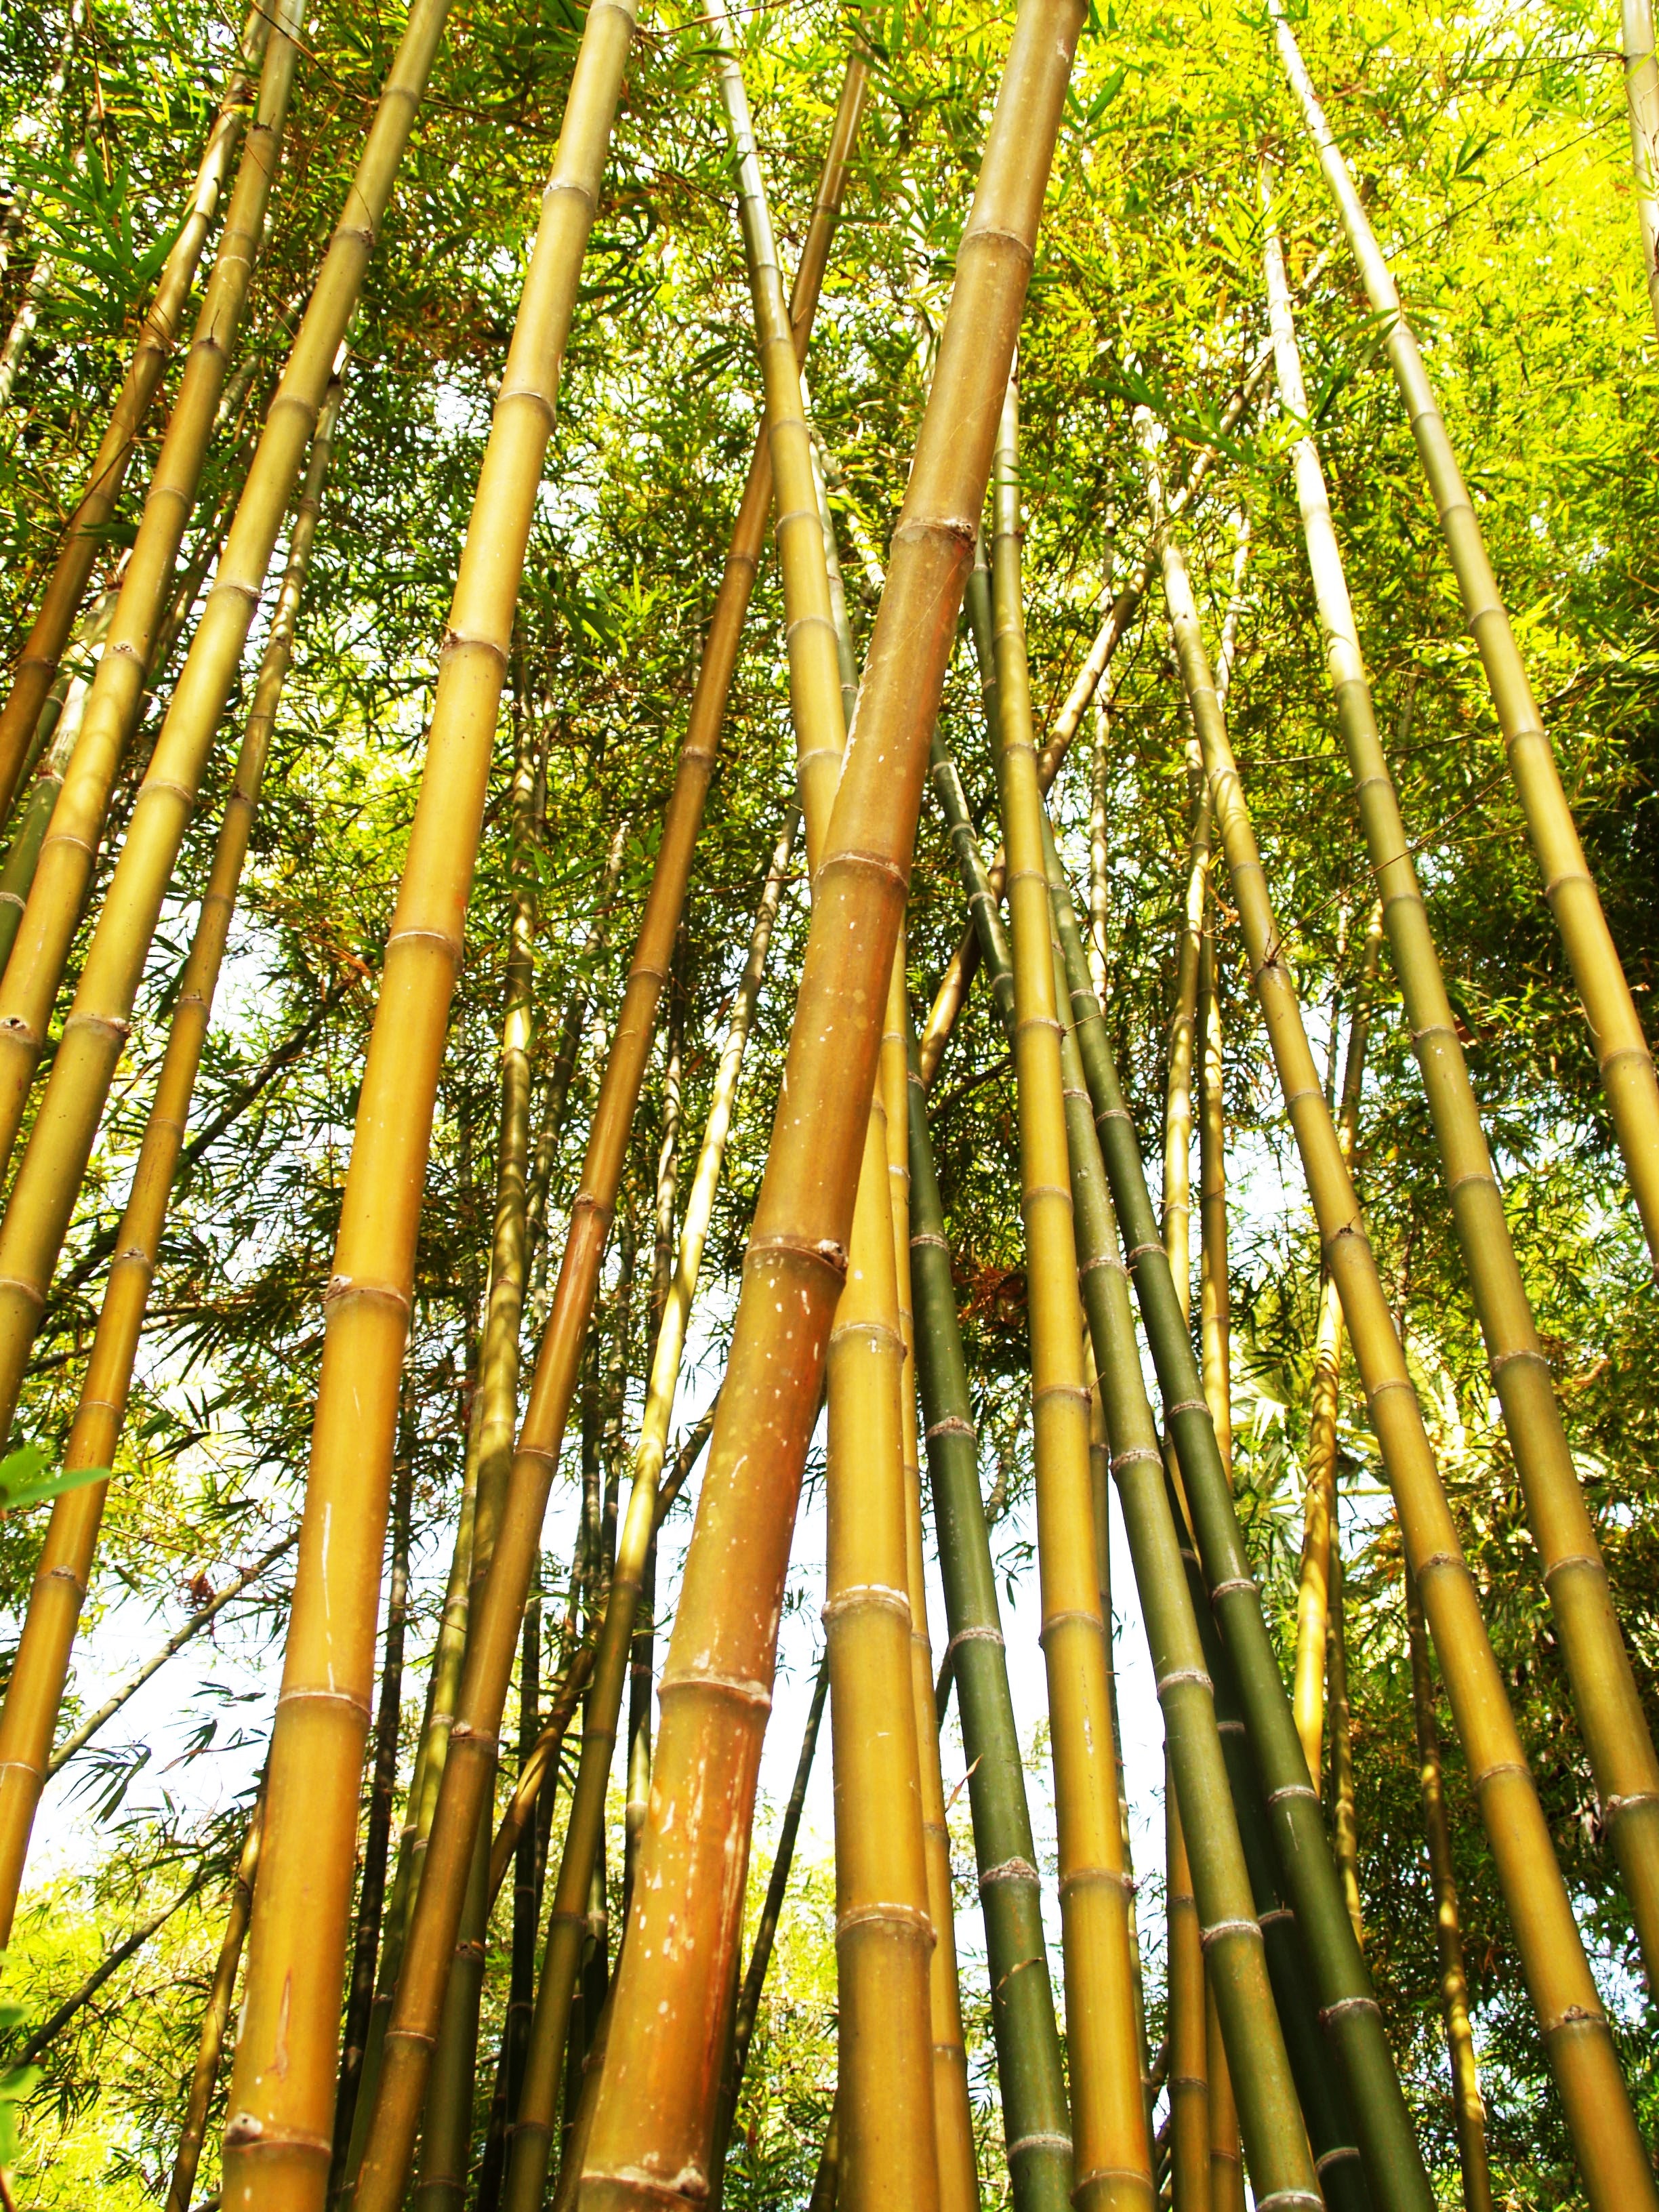 Bamboo Tree during Daytime, Leaf, Wood, Tropical, Plant, HQ Photo